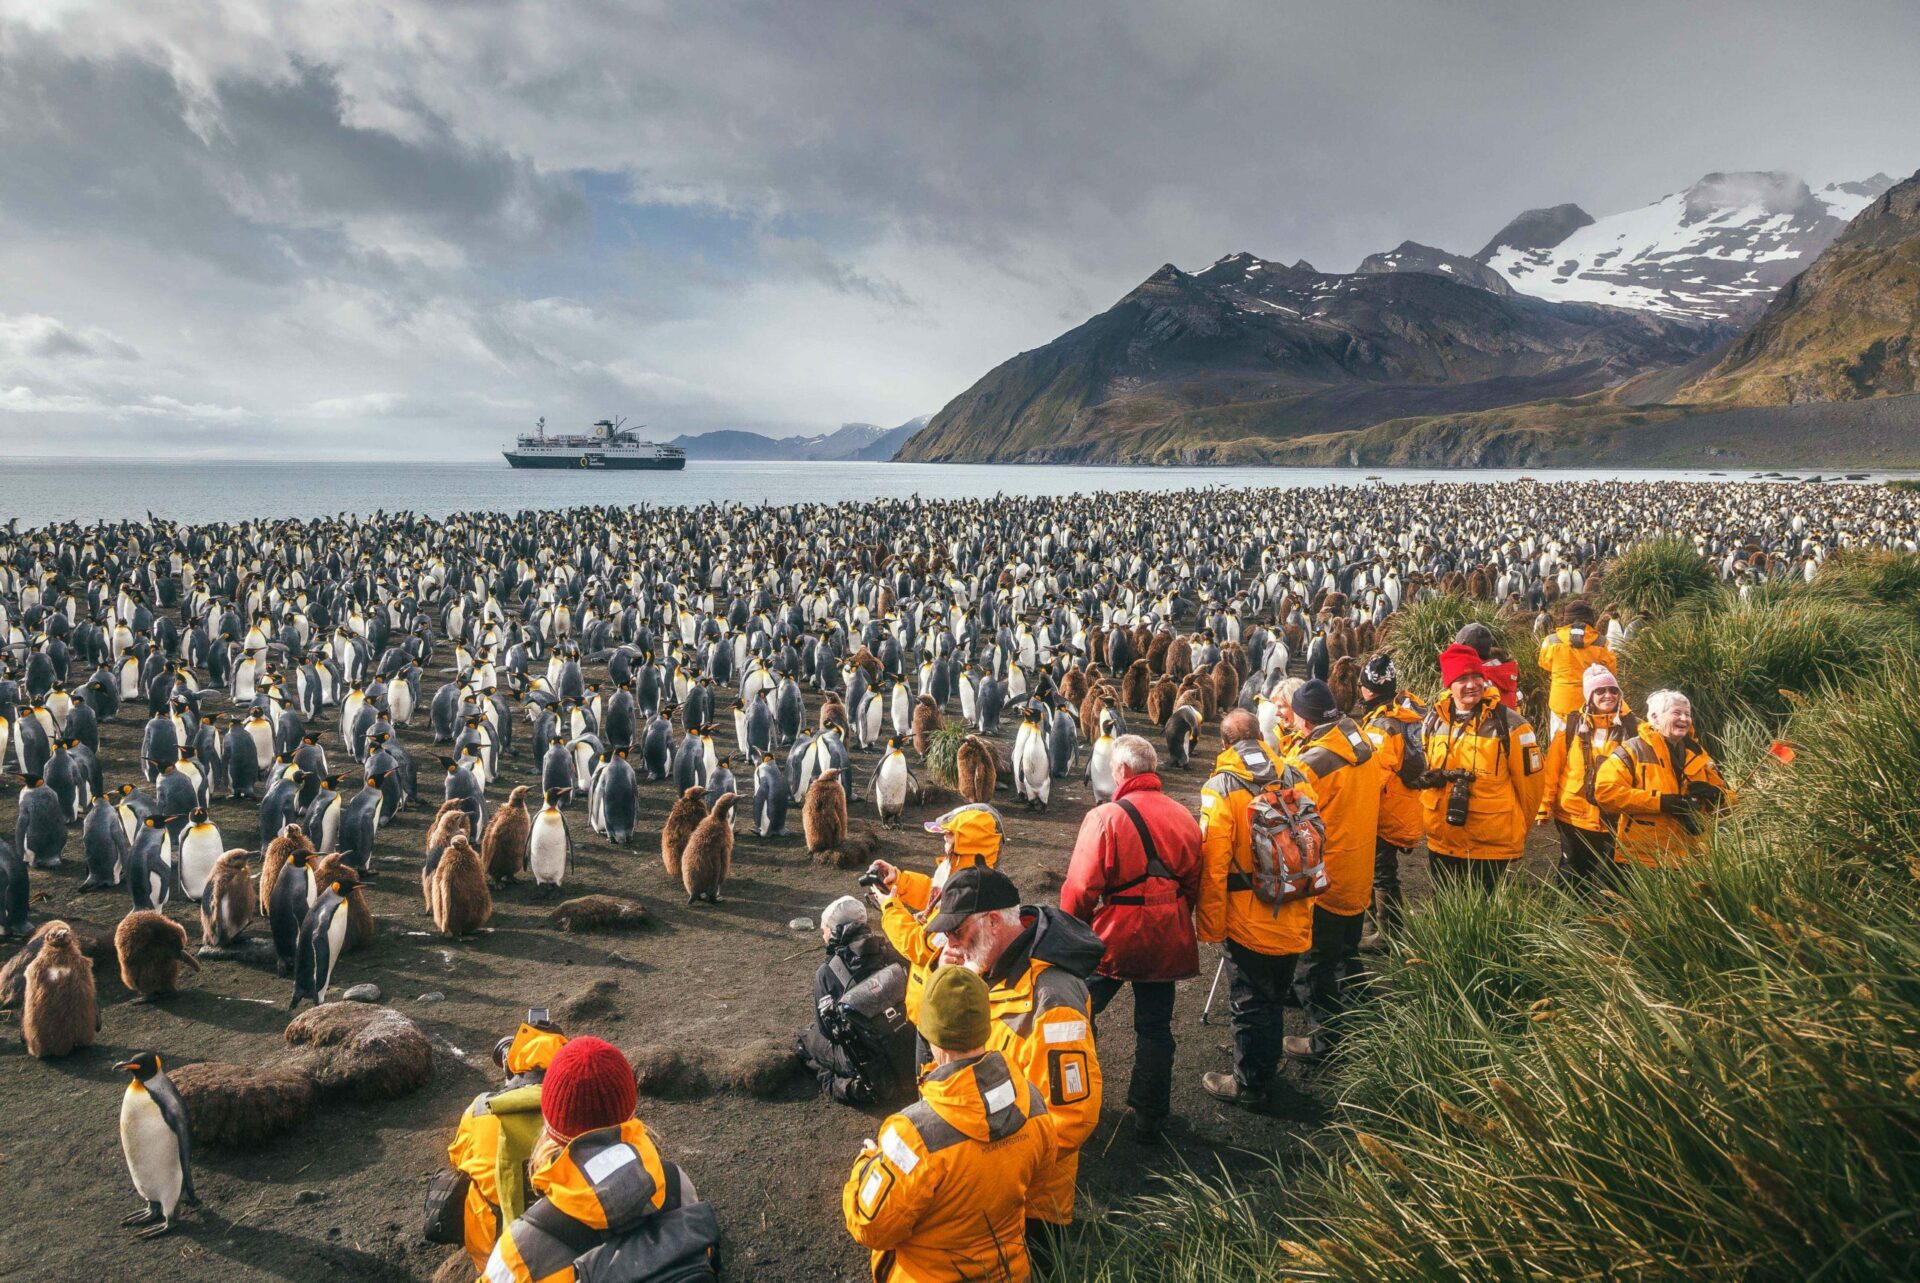 colony of King penguins on the beach of South Georgia, guests in yellow jackets taking photos, ship moored in the distance